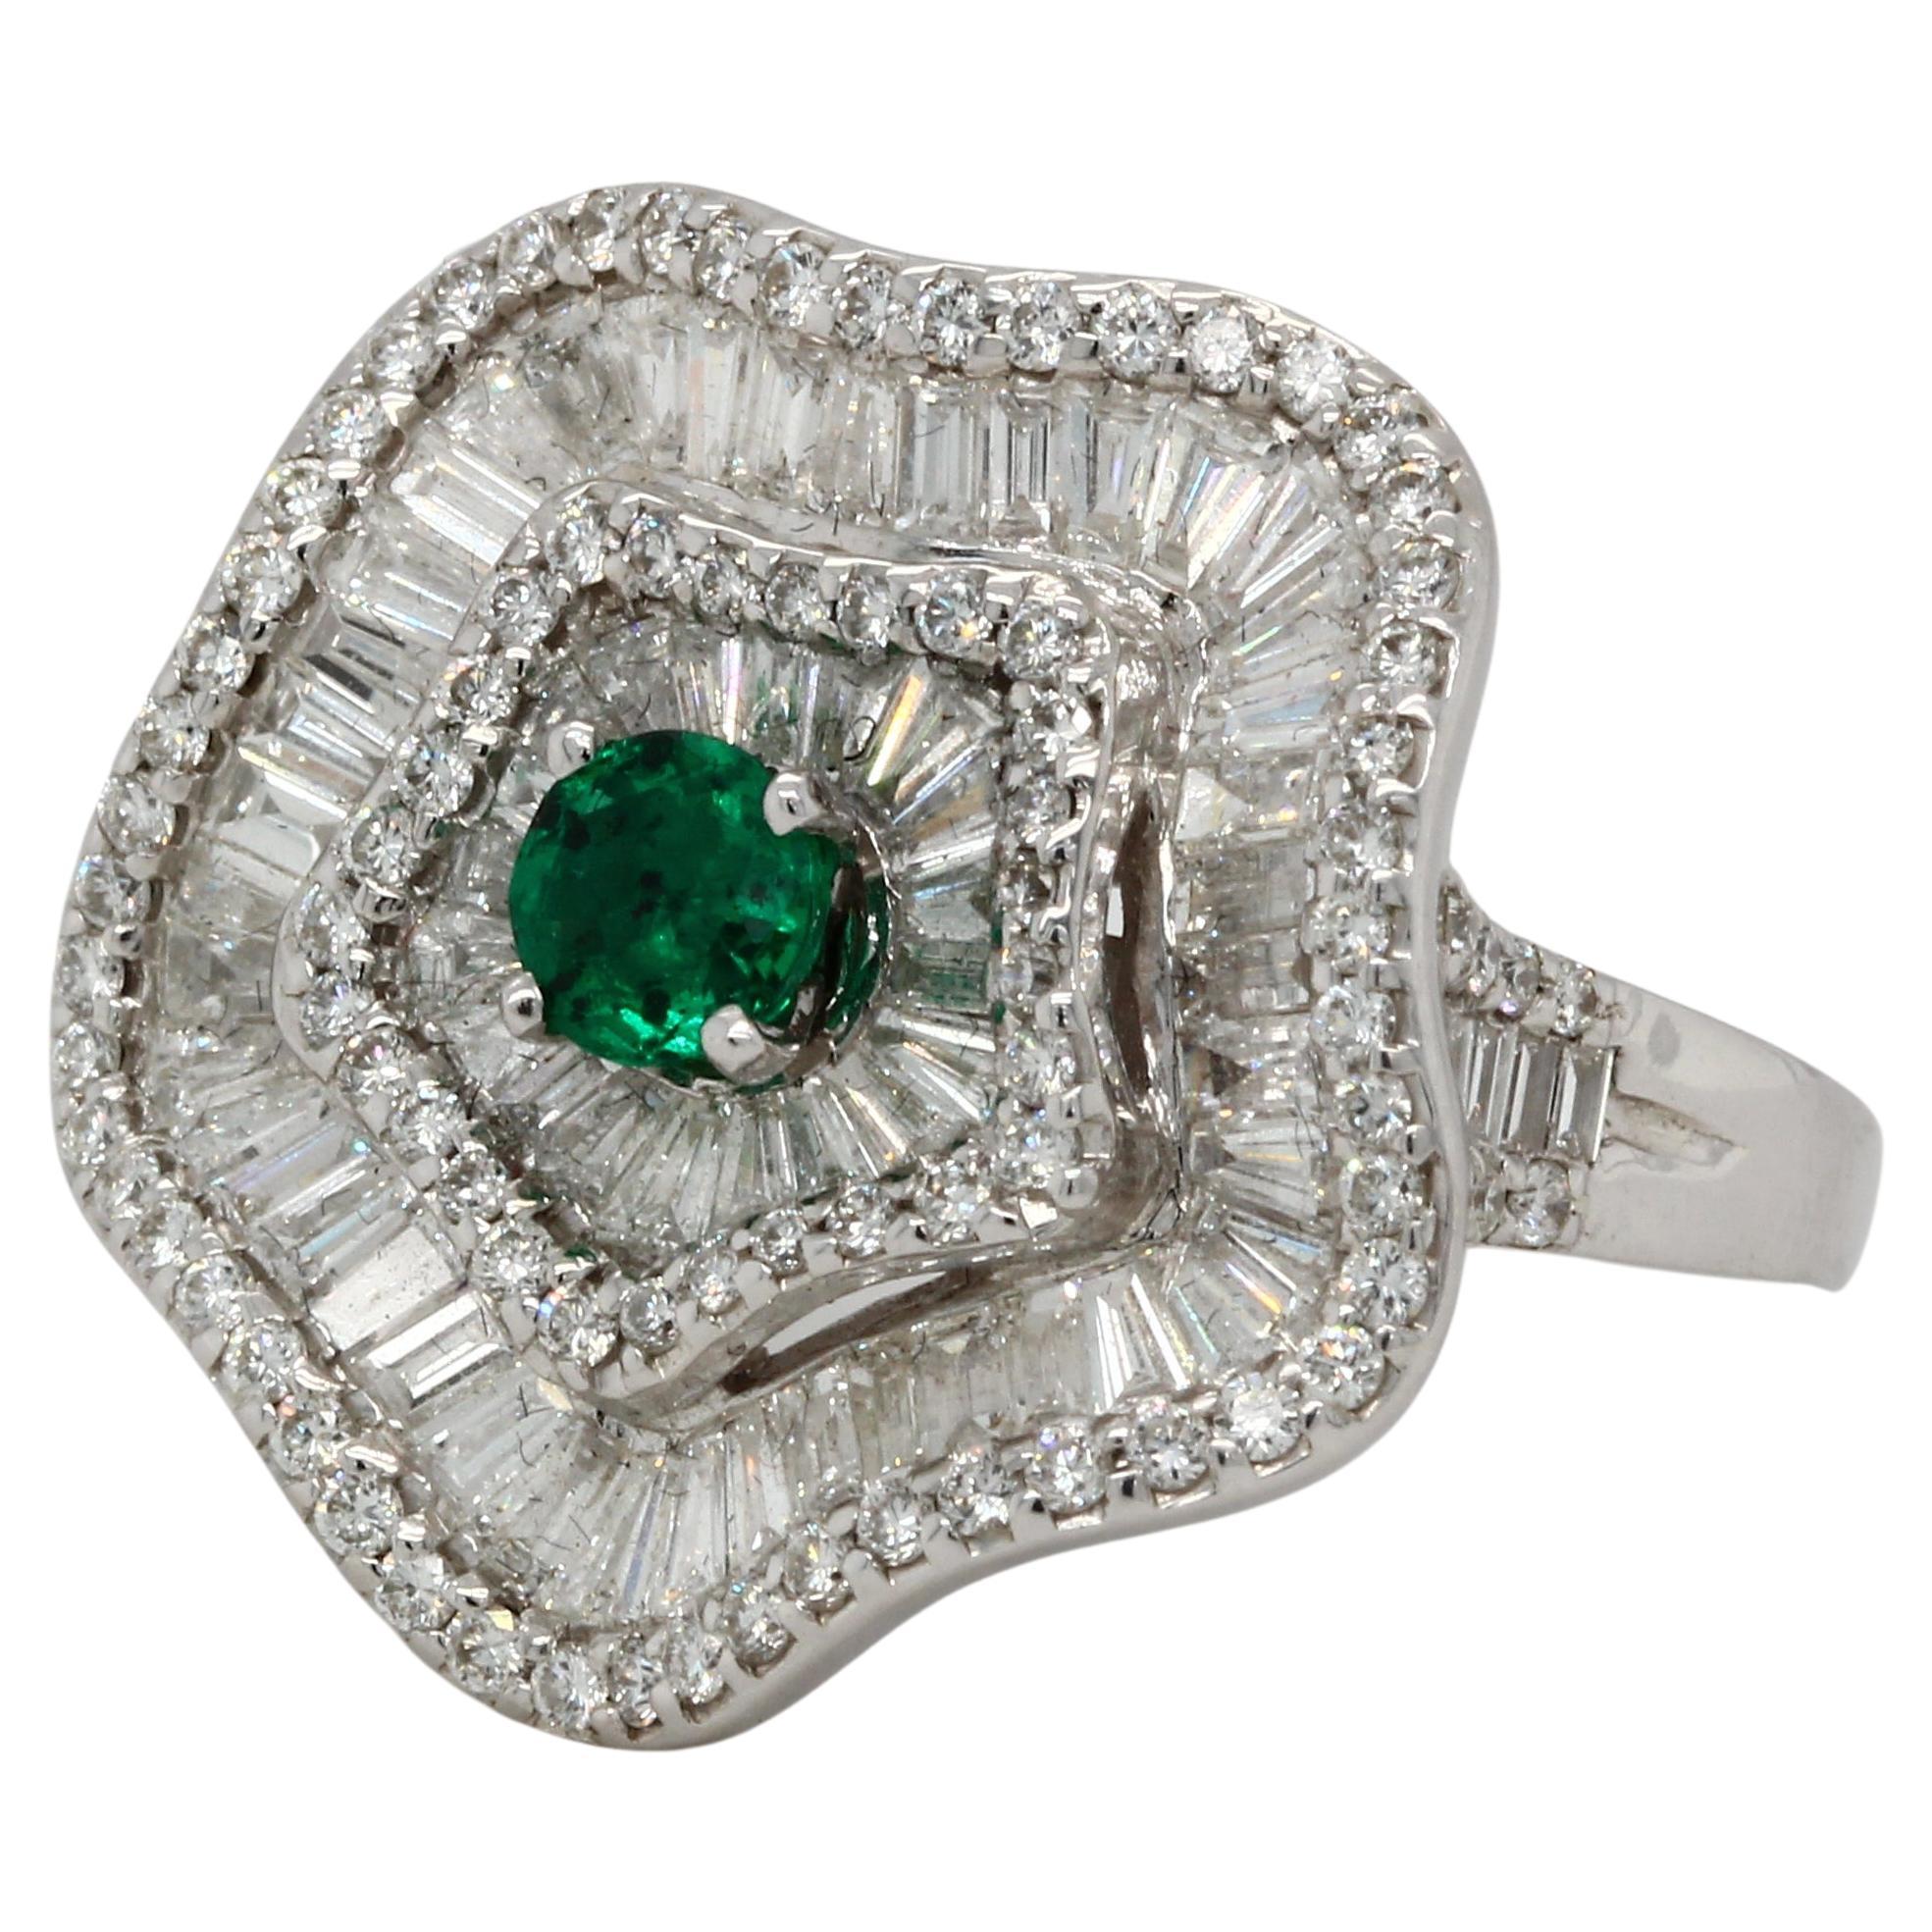 A brand new 18K gold emerald and diamond ring. This ring has a 0.32 carat emerald round, 1.29 carat diamond tapper, and 0.57 carat diamond round. This ring is made of 18K white gold and weighs 6.84 grams.

Allure Jewellery Mfg. Co., Ltd. stands out